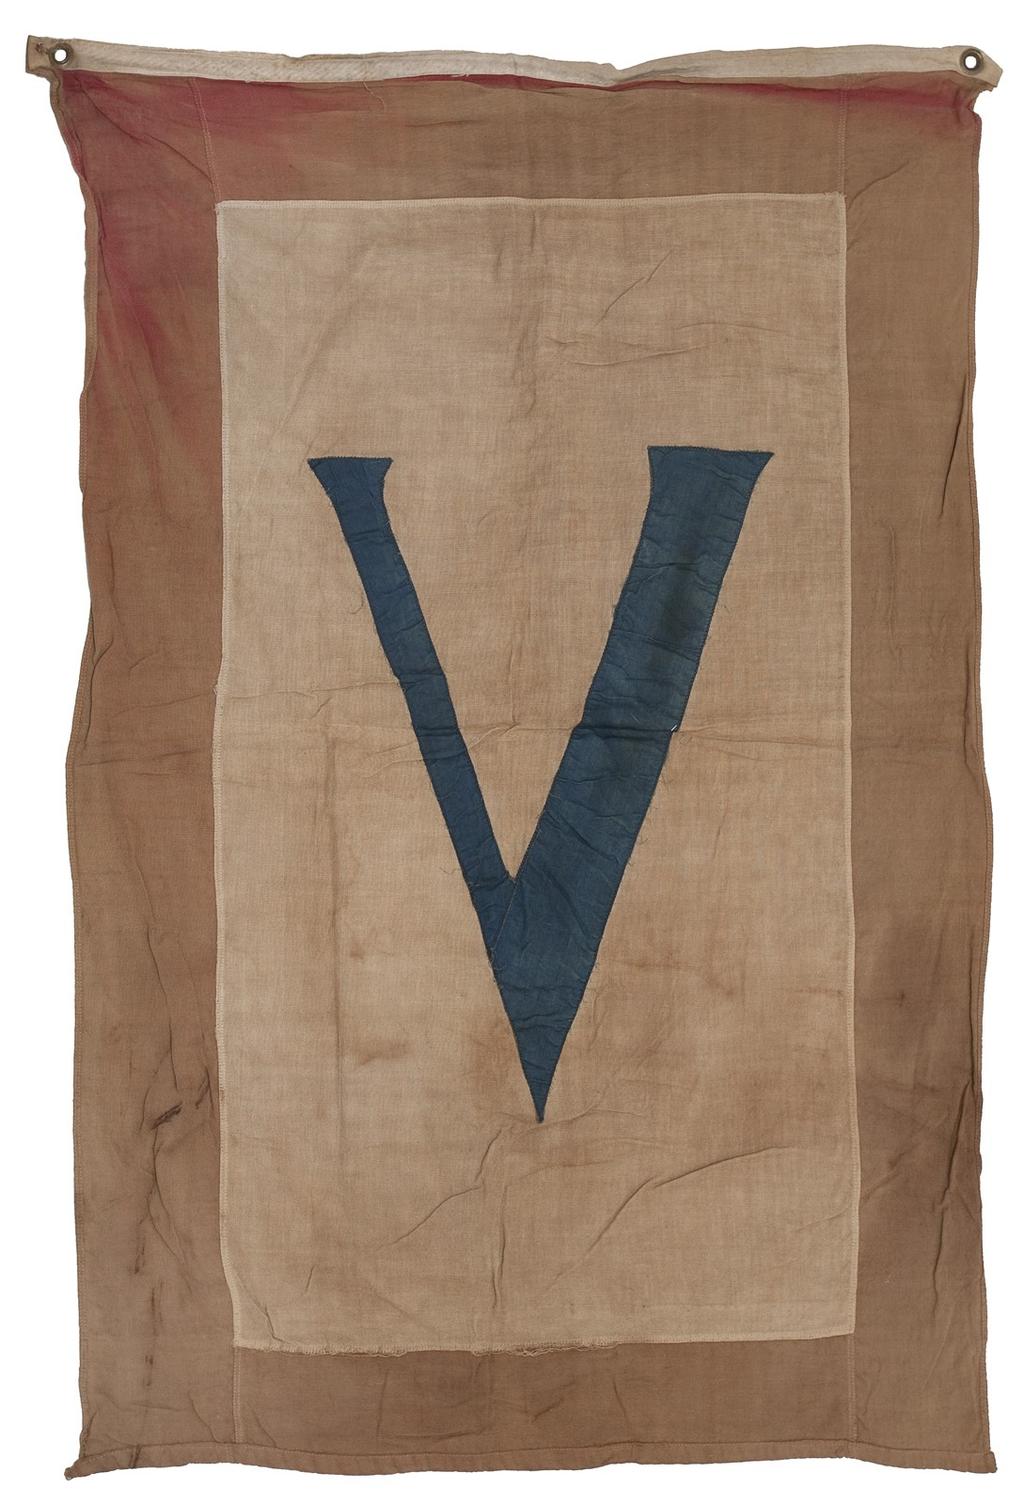 Fifth Liberty Loan Flag 1919 During World War I, Lexington participated in five drives for the sale of bonds to finance American involvement in the war.